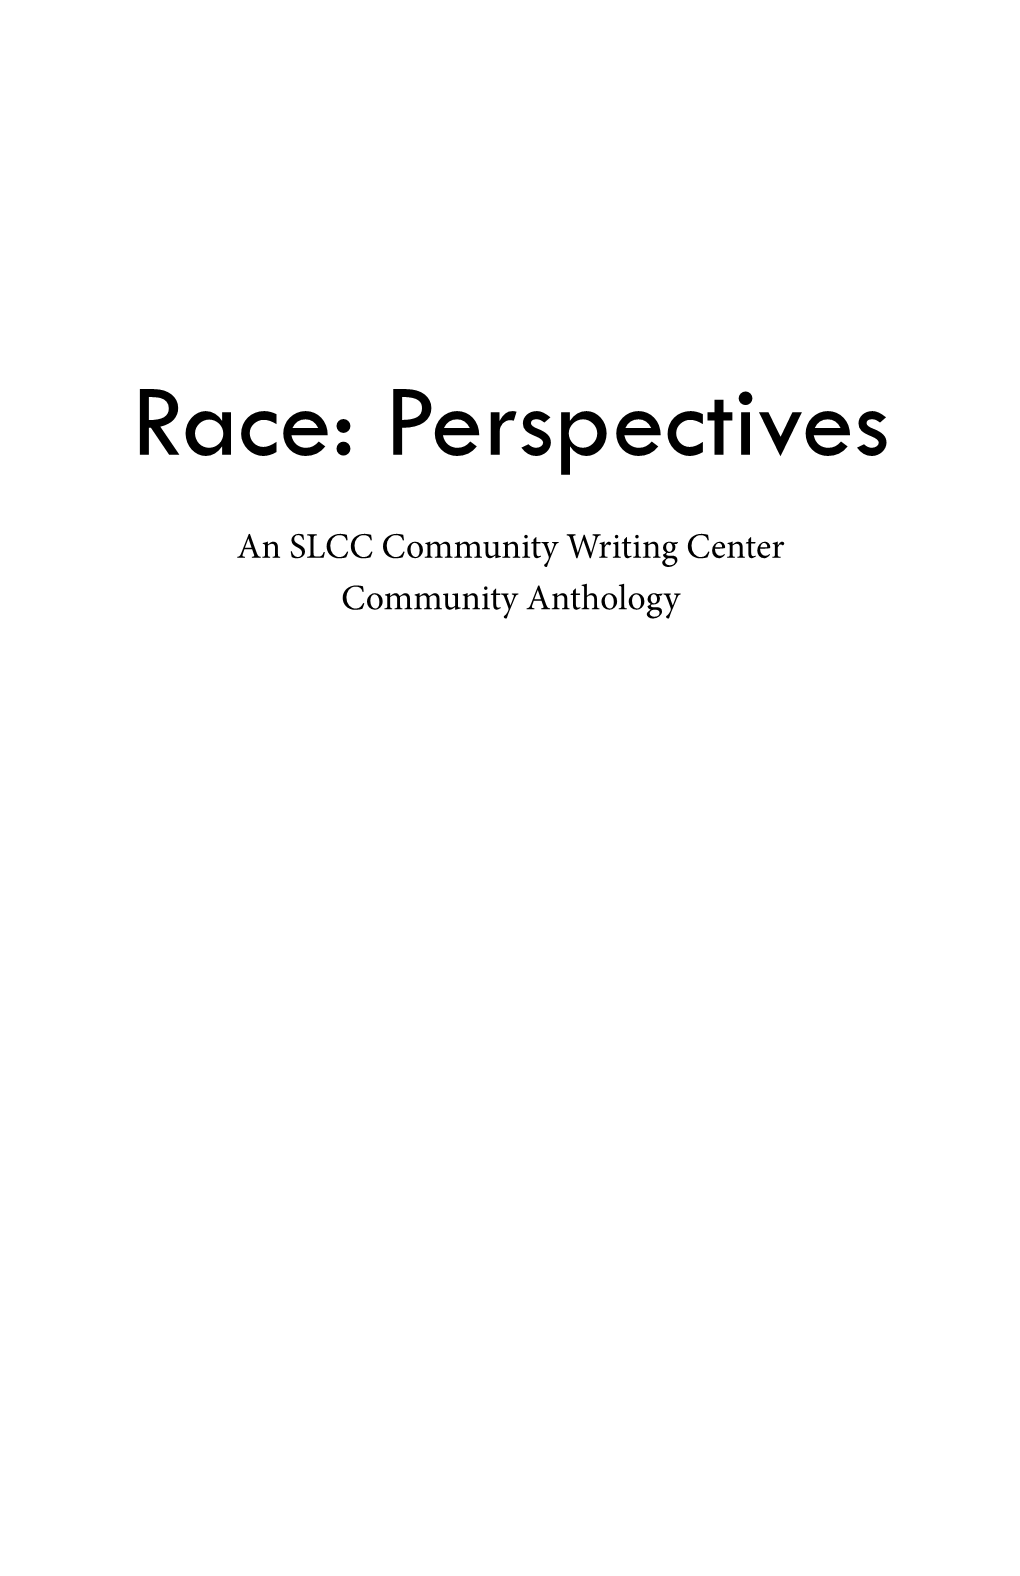 Race: Perspectives